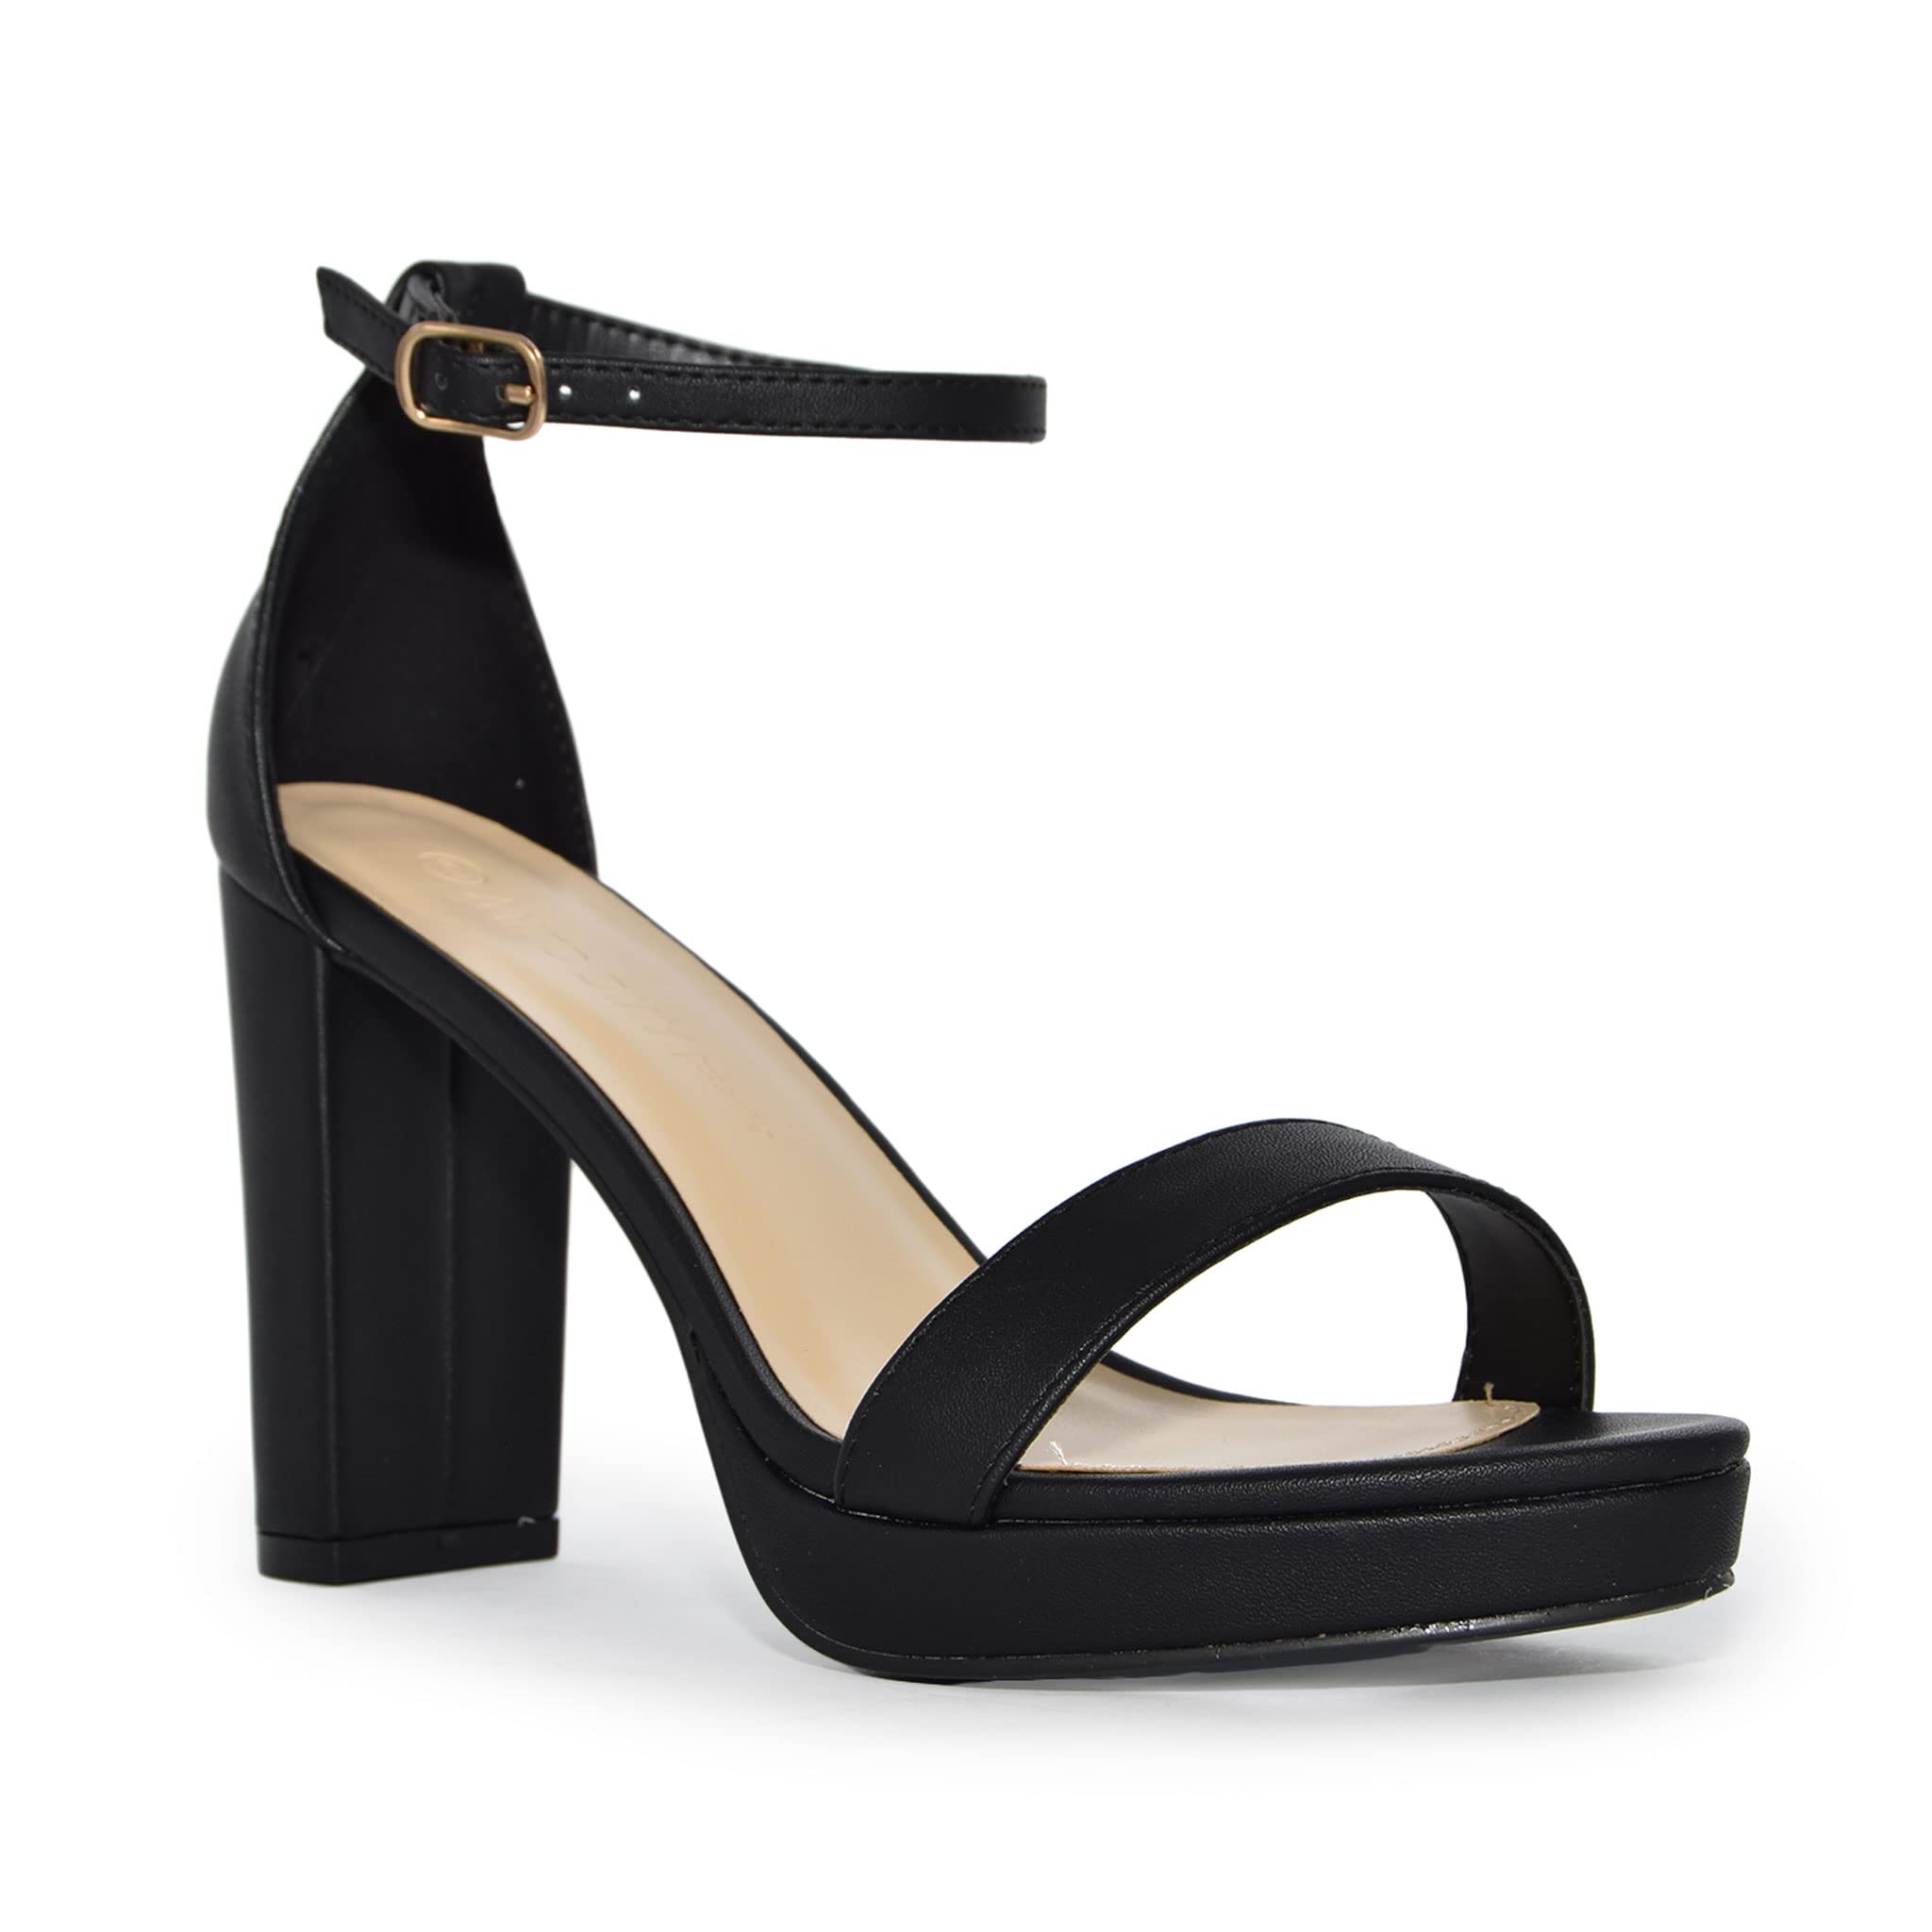 4 Inch Heel Partywear Sandal - Black at Rs 543/piece | Madipur | New Delhi|  ID: 2853124297930